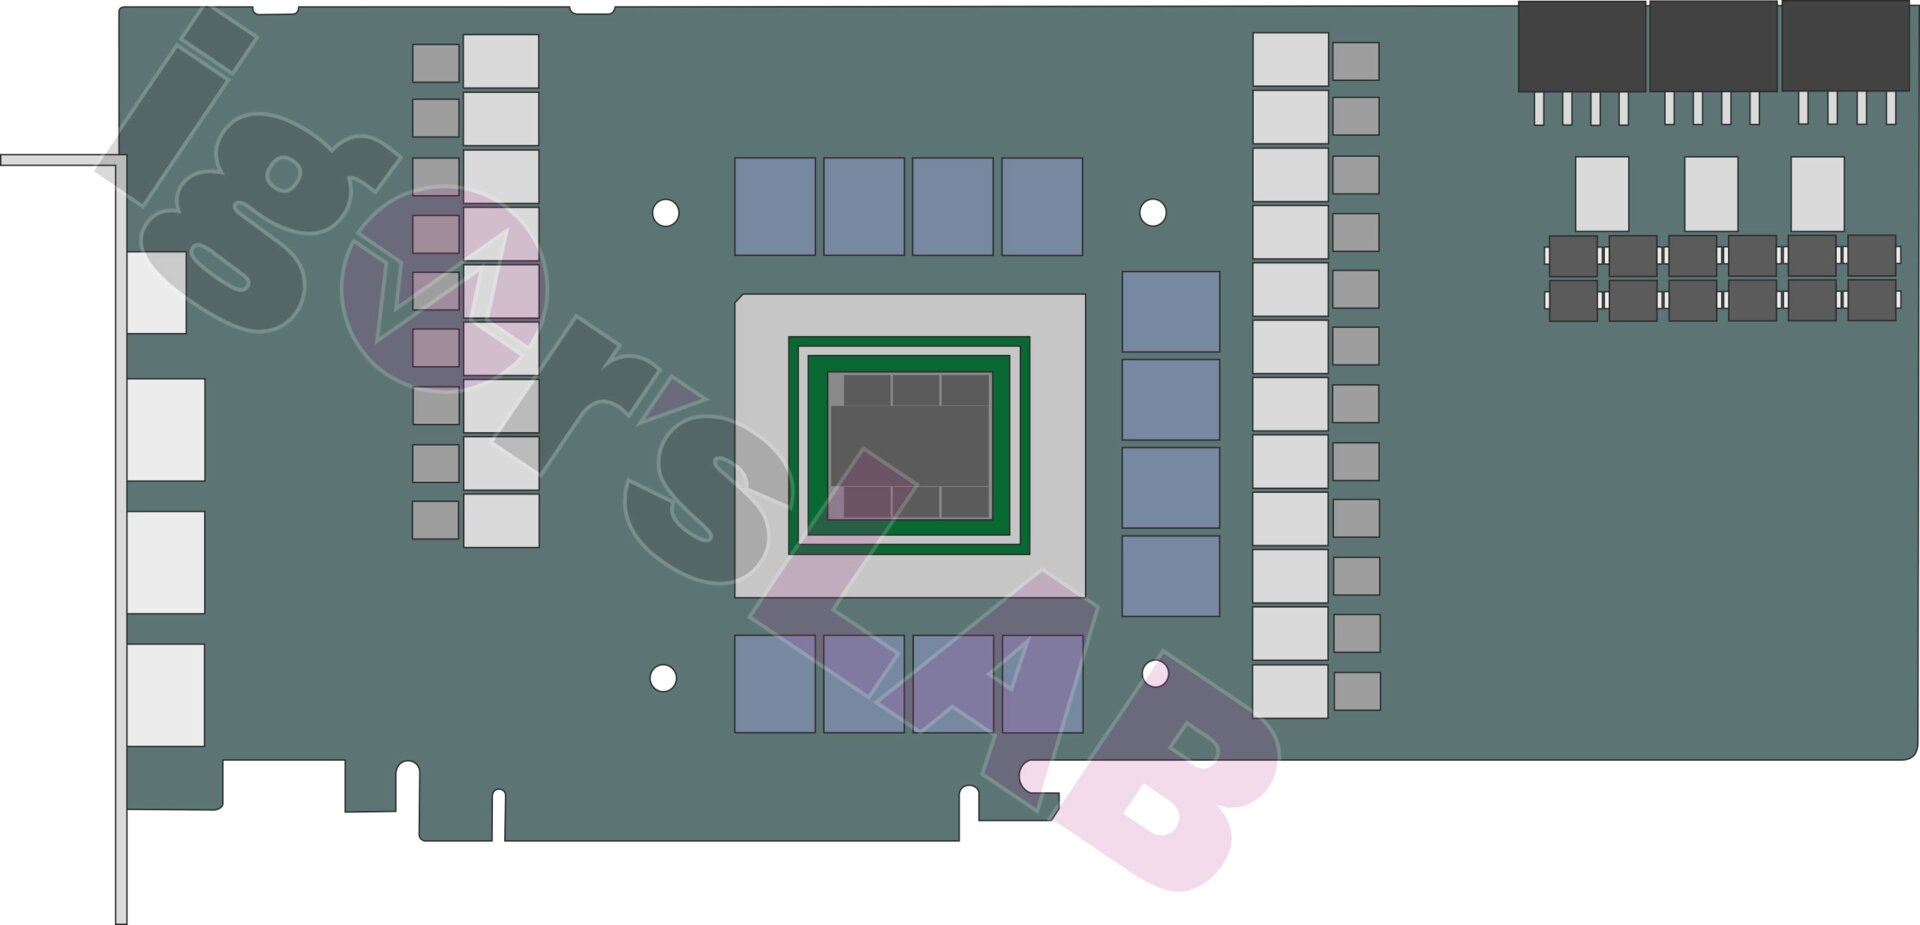 This is what the PCB reference design of the Radeon RX 7900 XT should look like